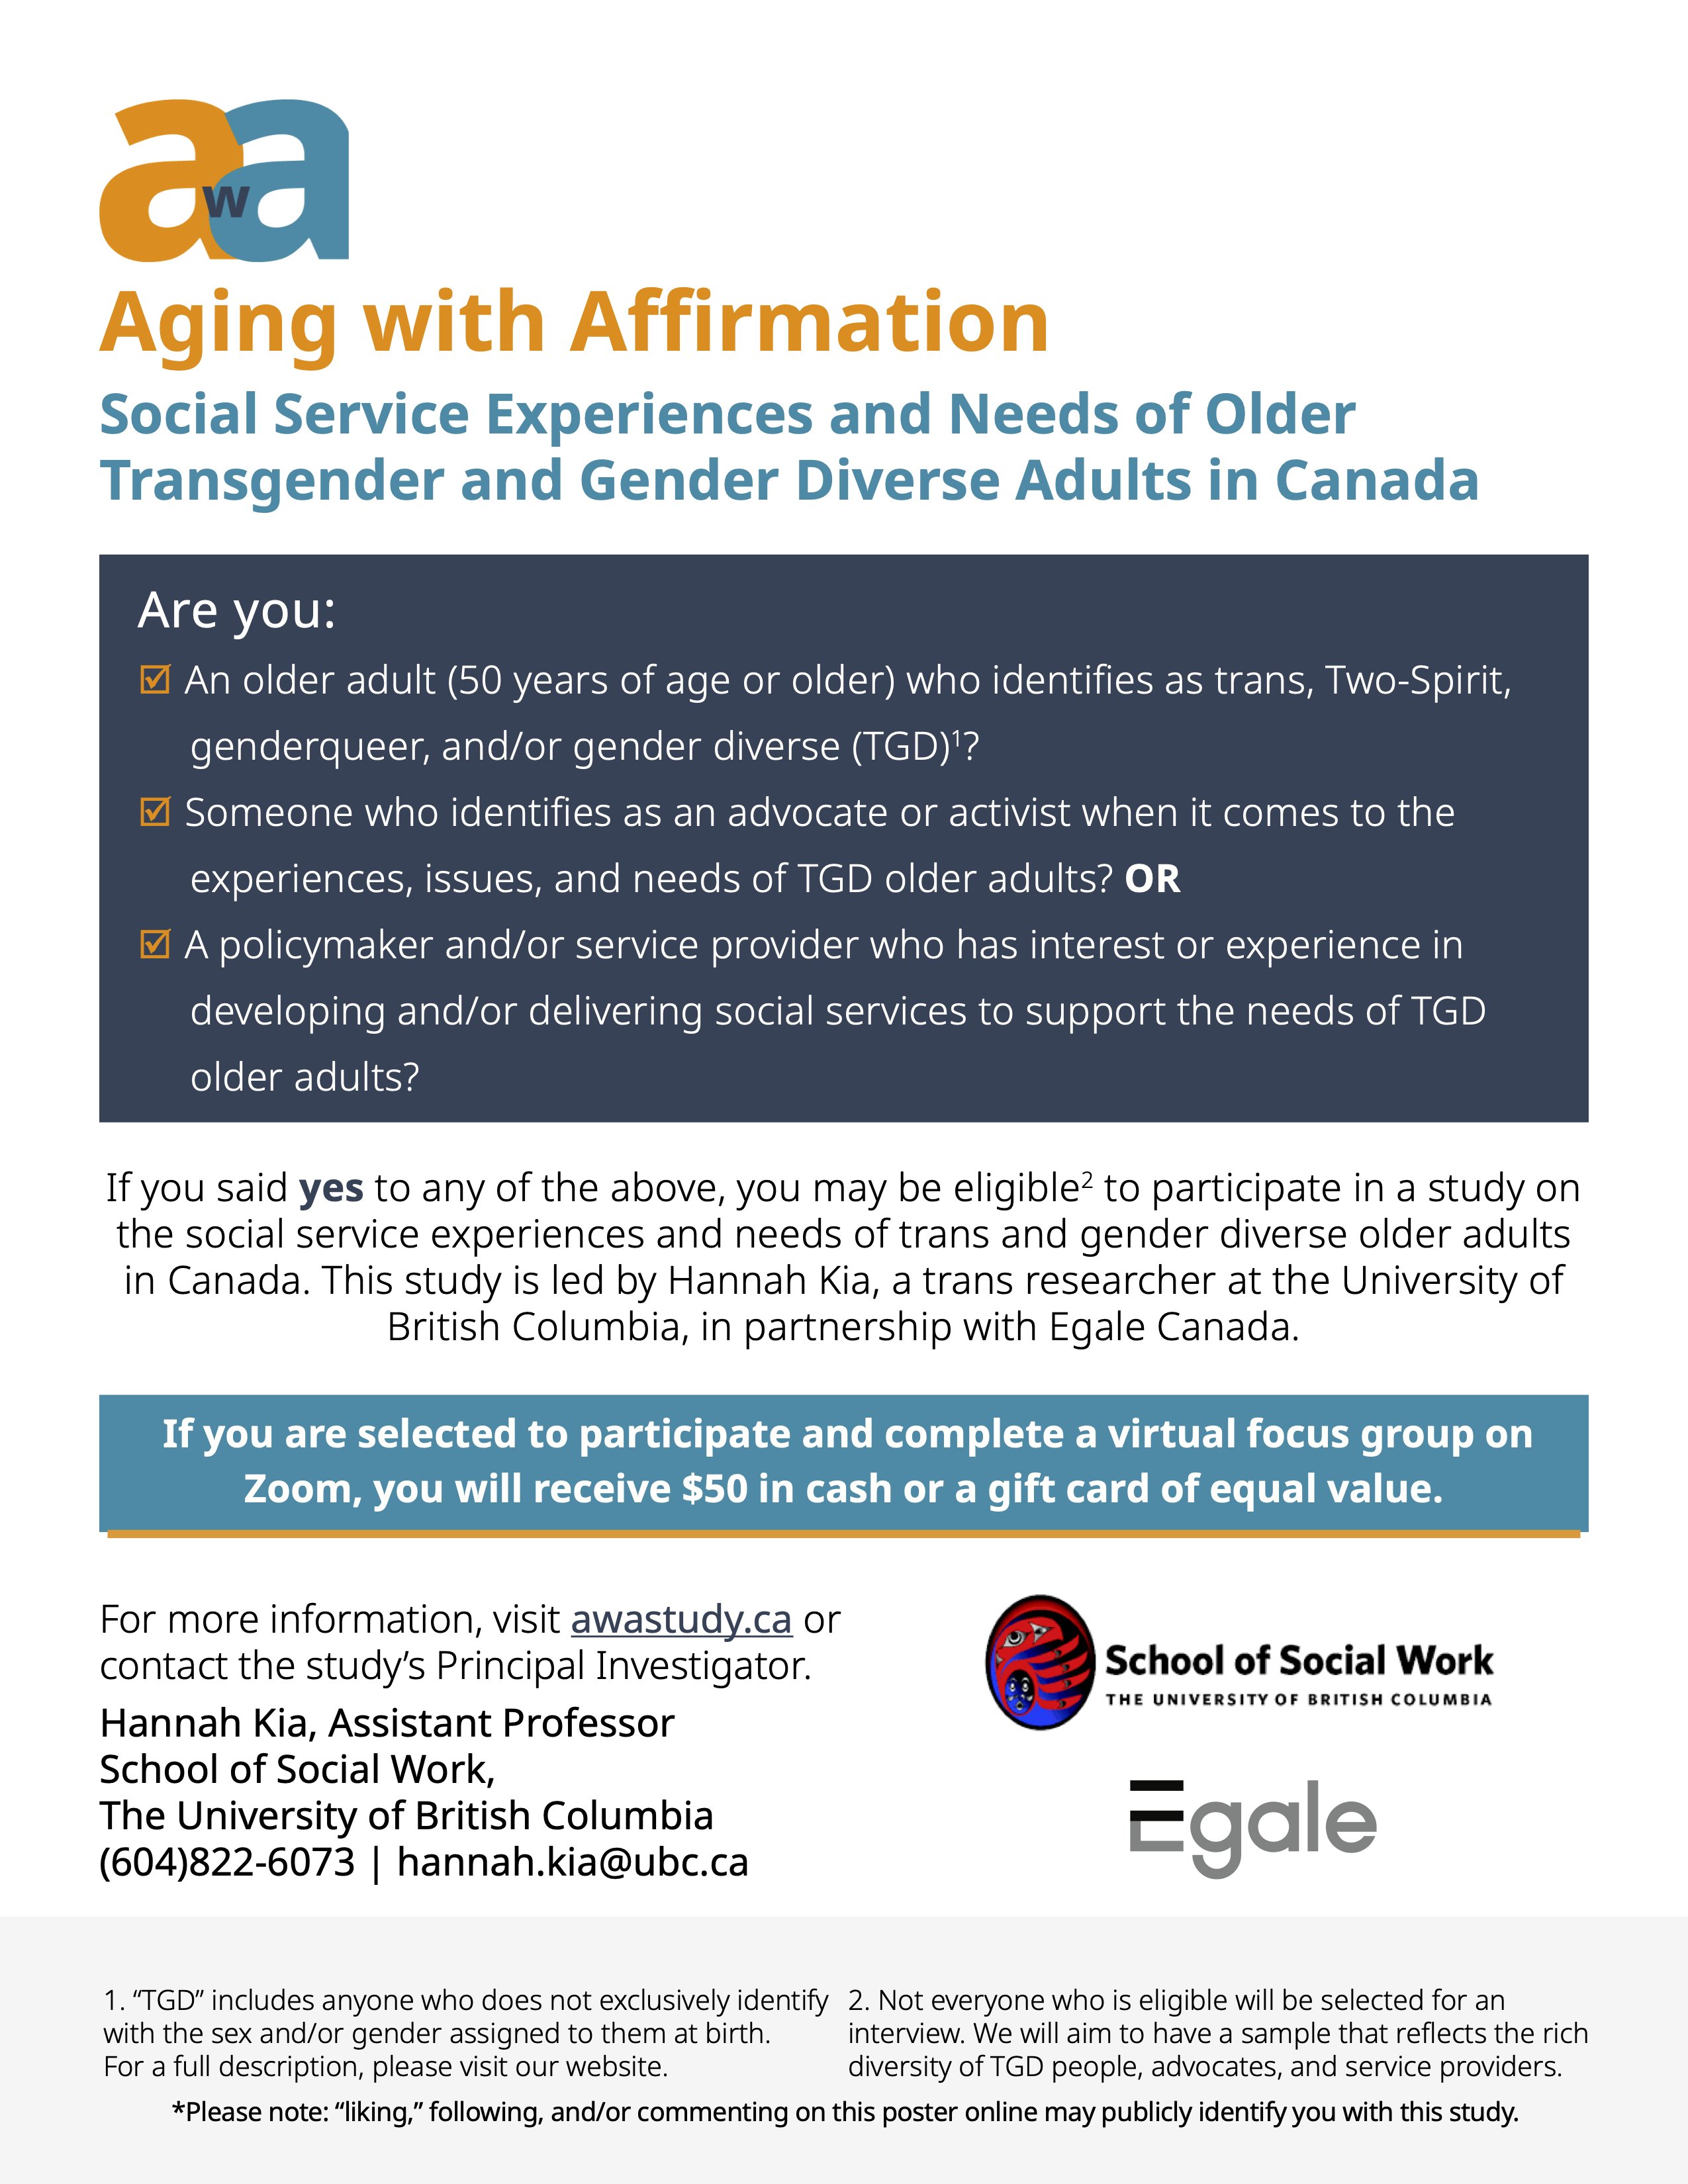 CBRC on X: New research study! Aging with Affirmation, in partnership with  @egalecanada, are looking to speak about social service experiences and the  needs of older trans and gender diverse adults. For